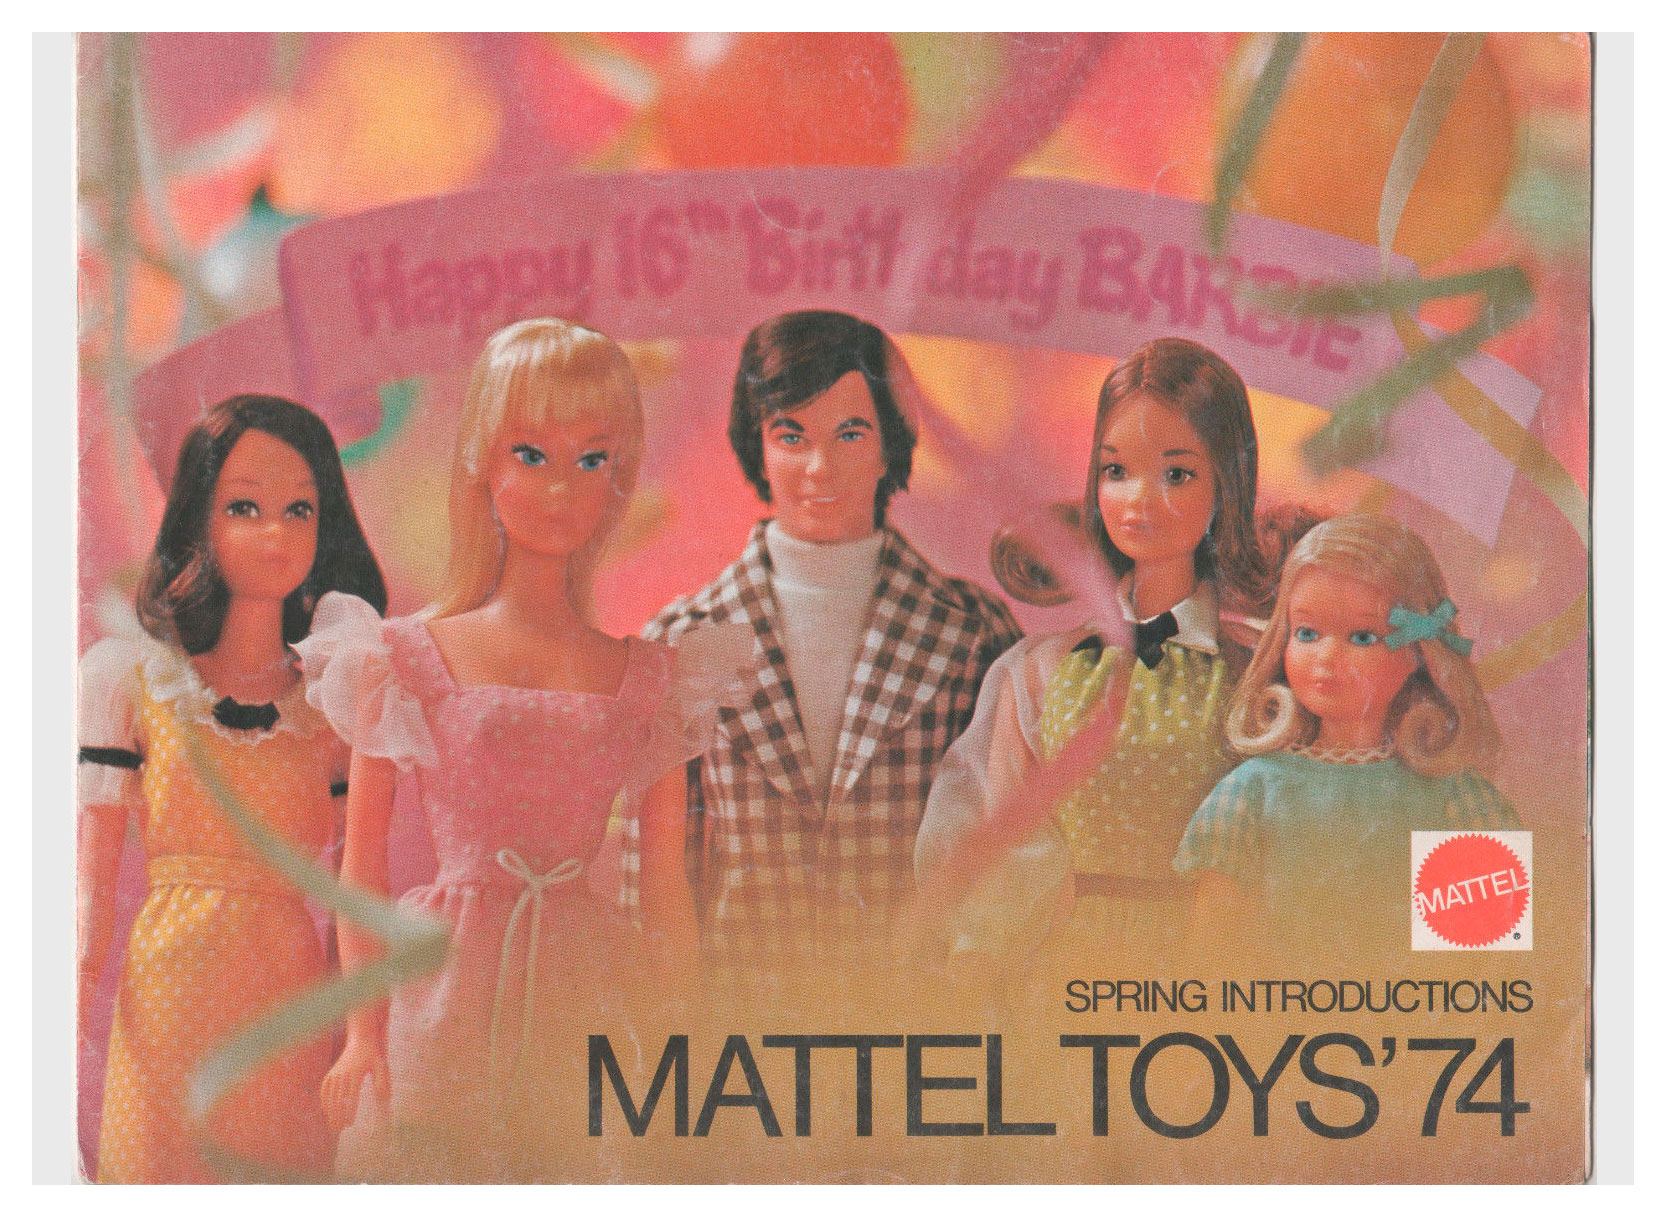 Mattel Toys '74 Spring Introductions catalogue